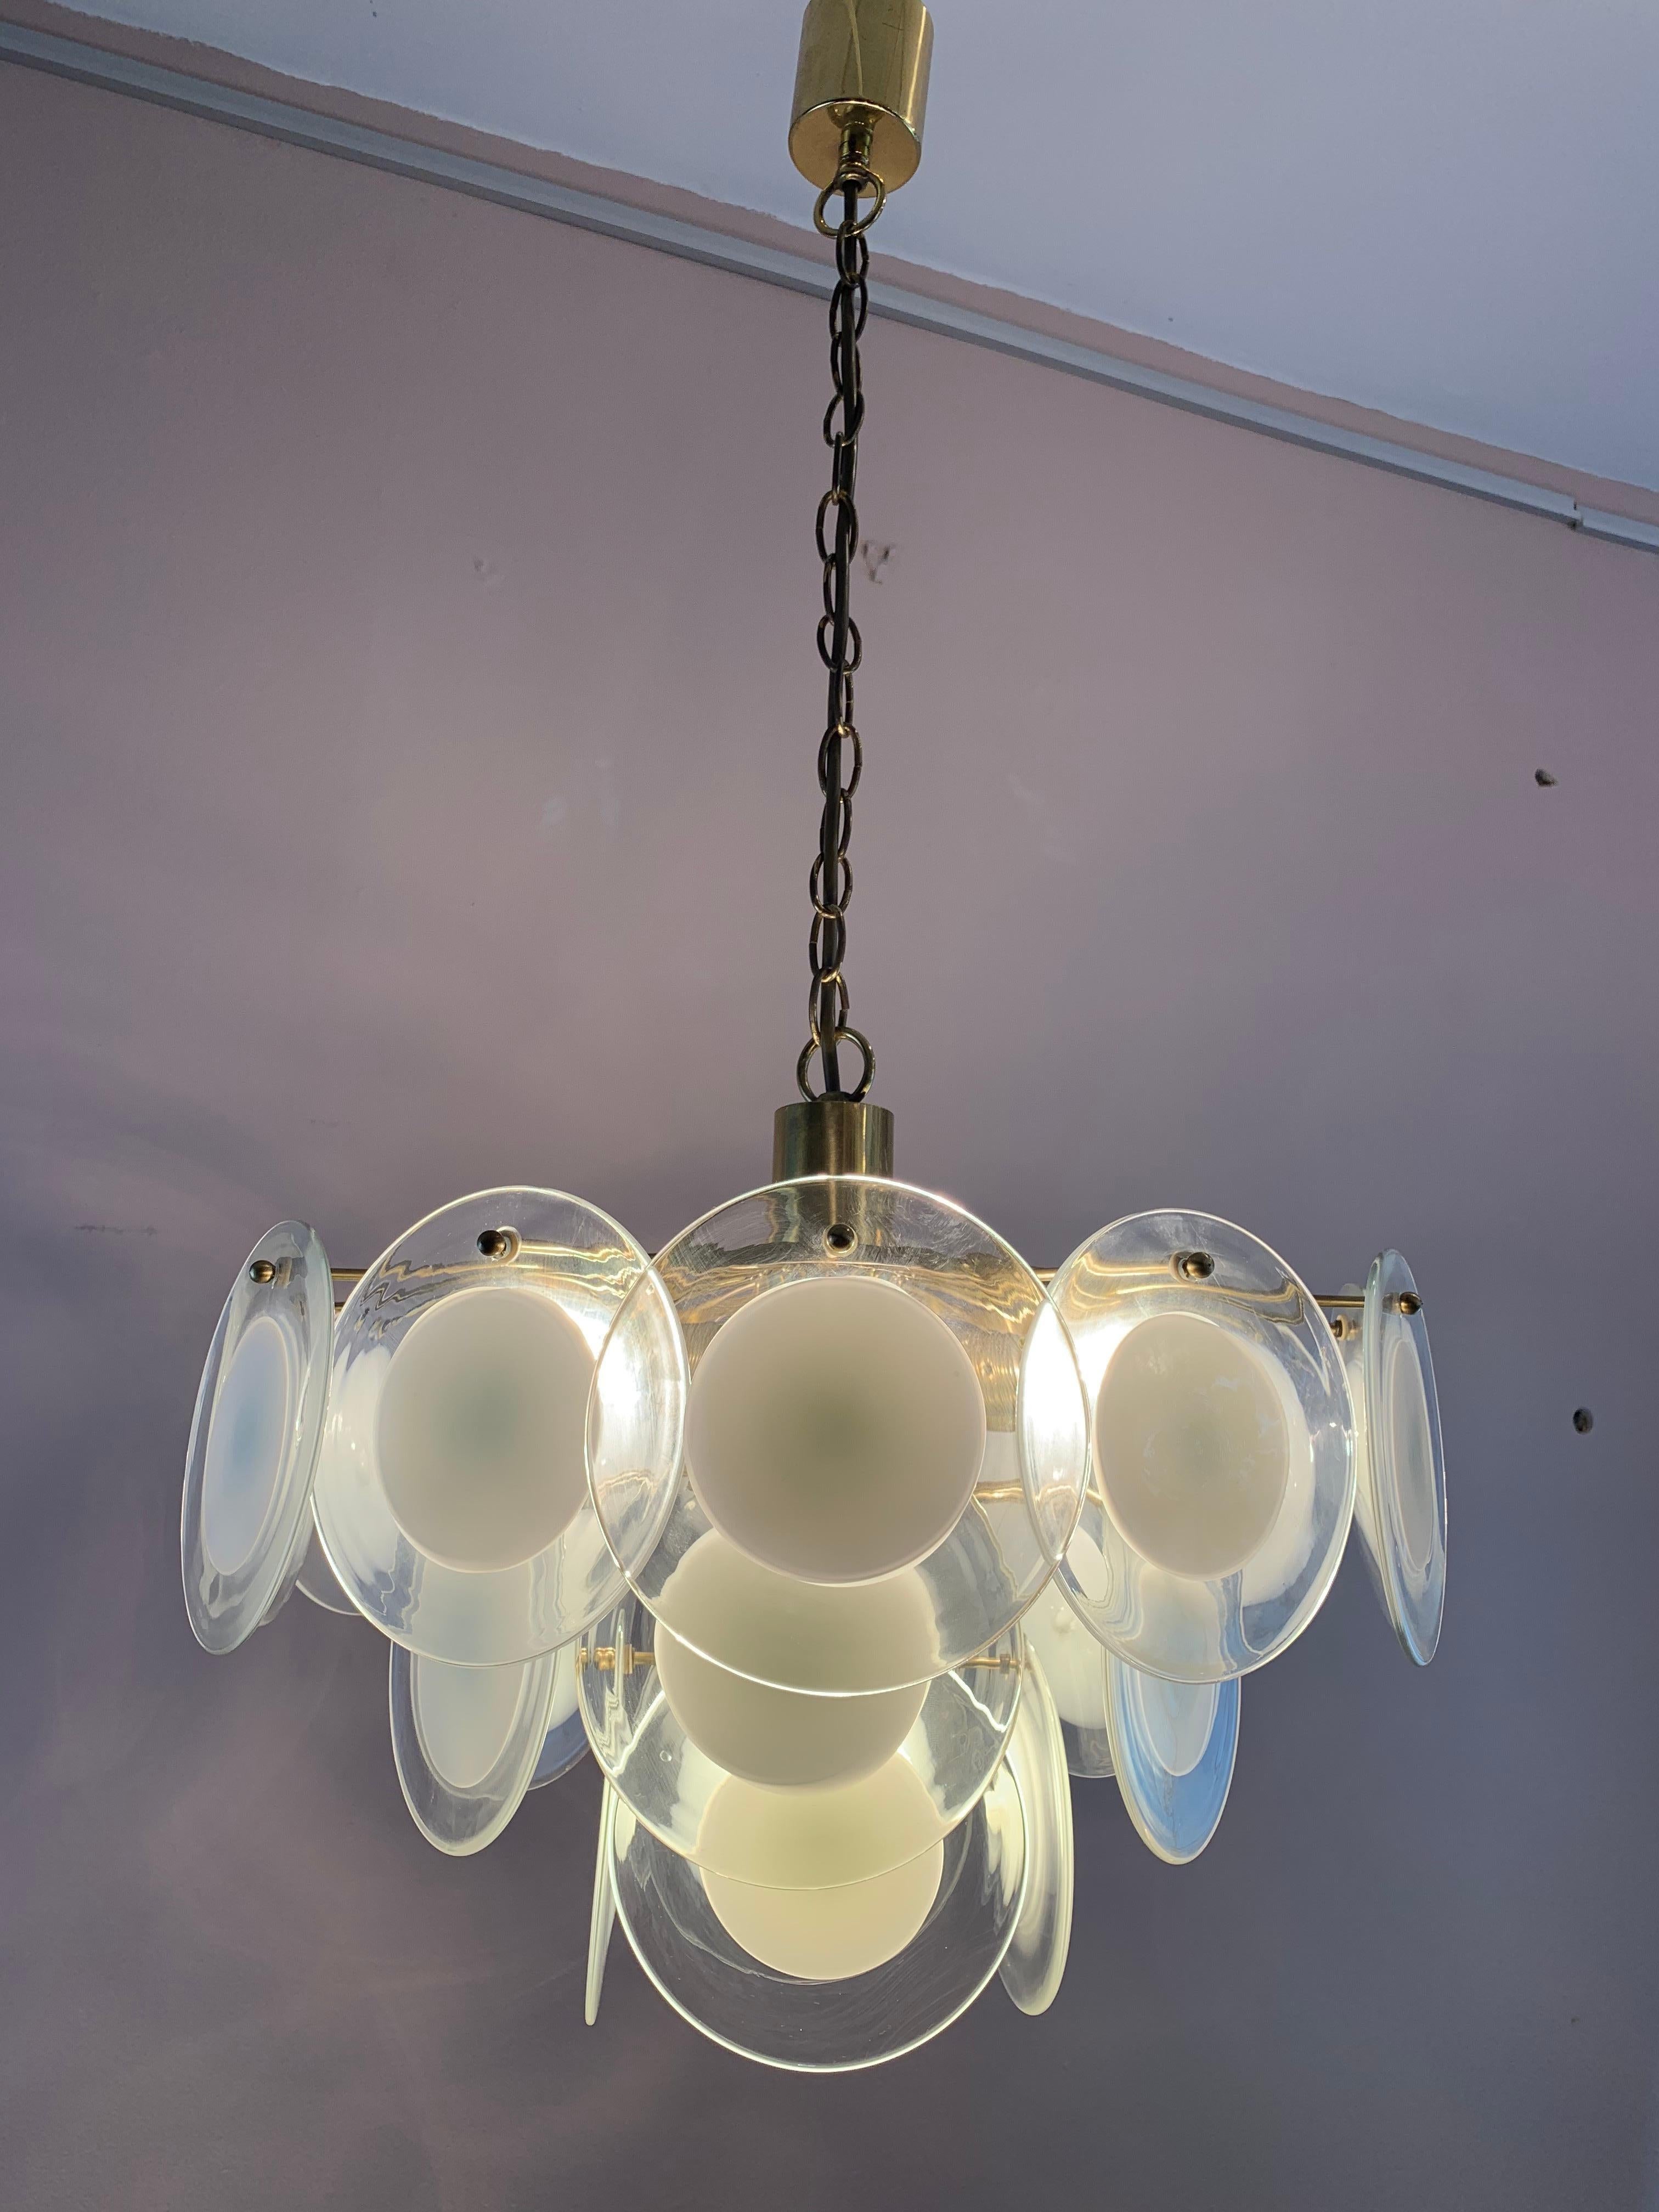 1970s Italian three-tier hanging ceiling light or chandelier in the style of Vistosi. The hand blown clear glass circular discs with white centres are suspended from a brass frame and held in place with small screws through a hole in the top of the